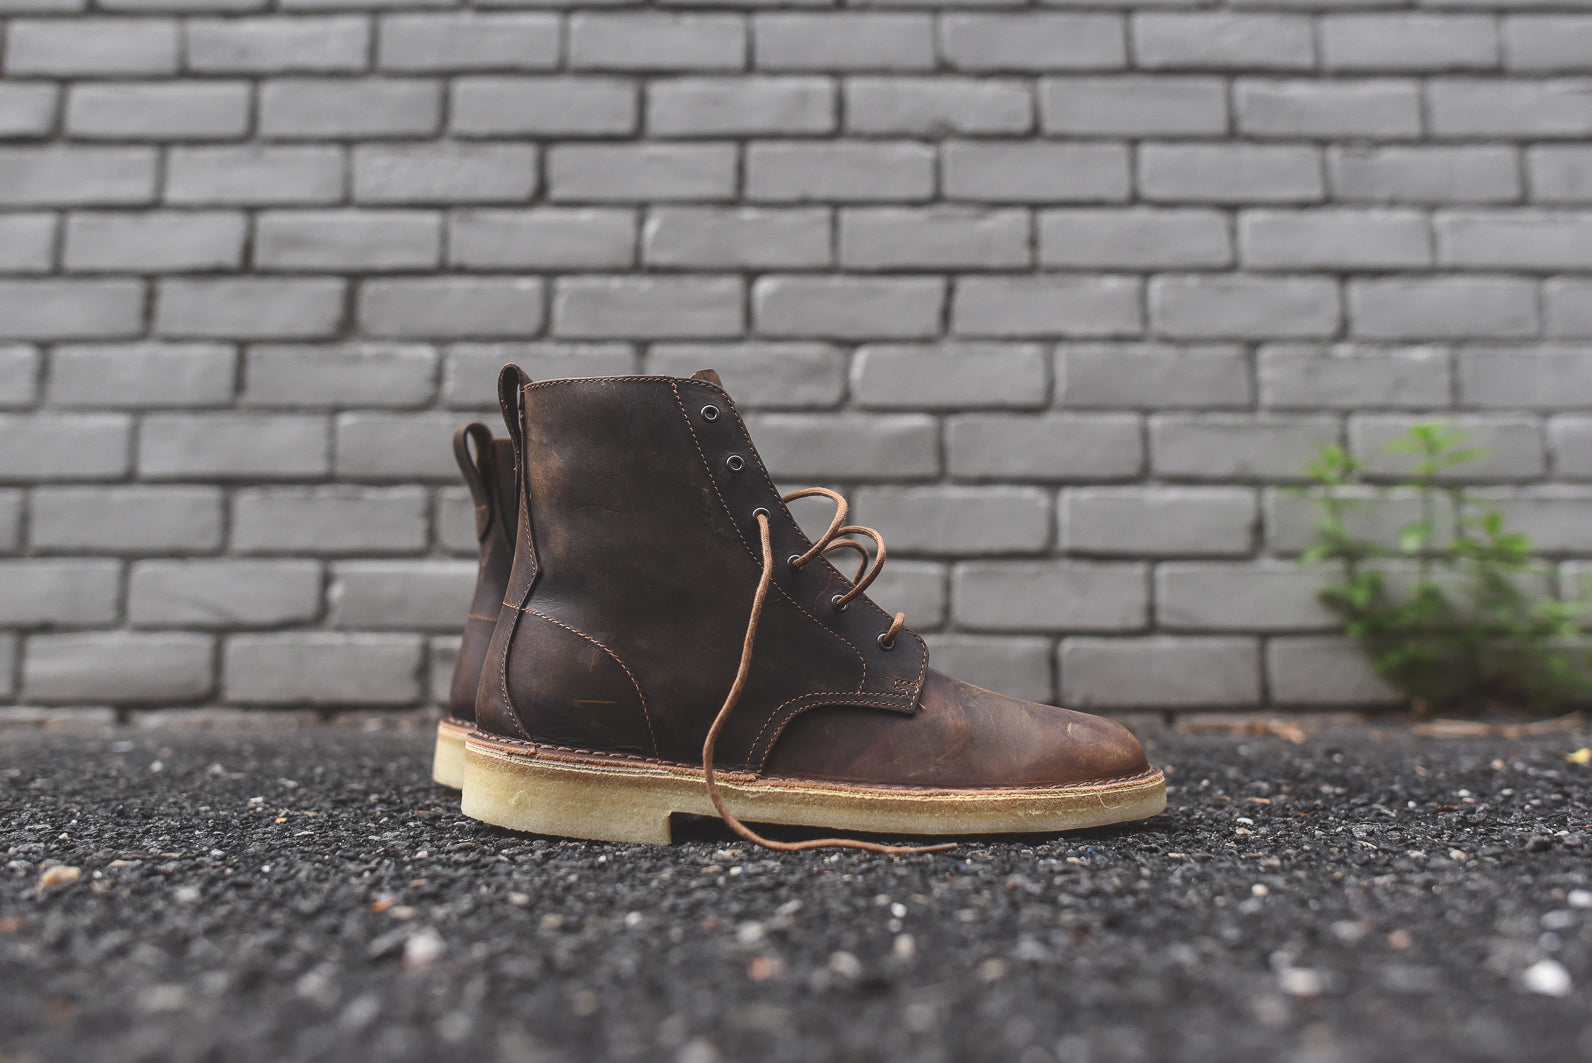 Clarks Fall/Winter 2015 Collection – Kith